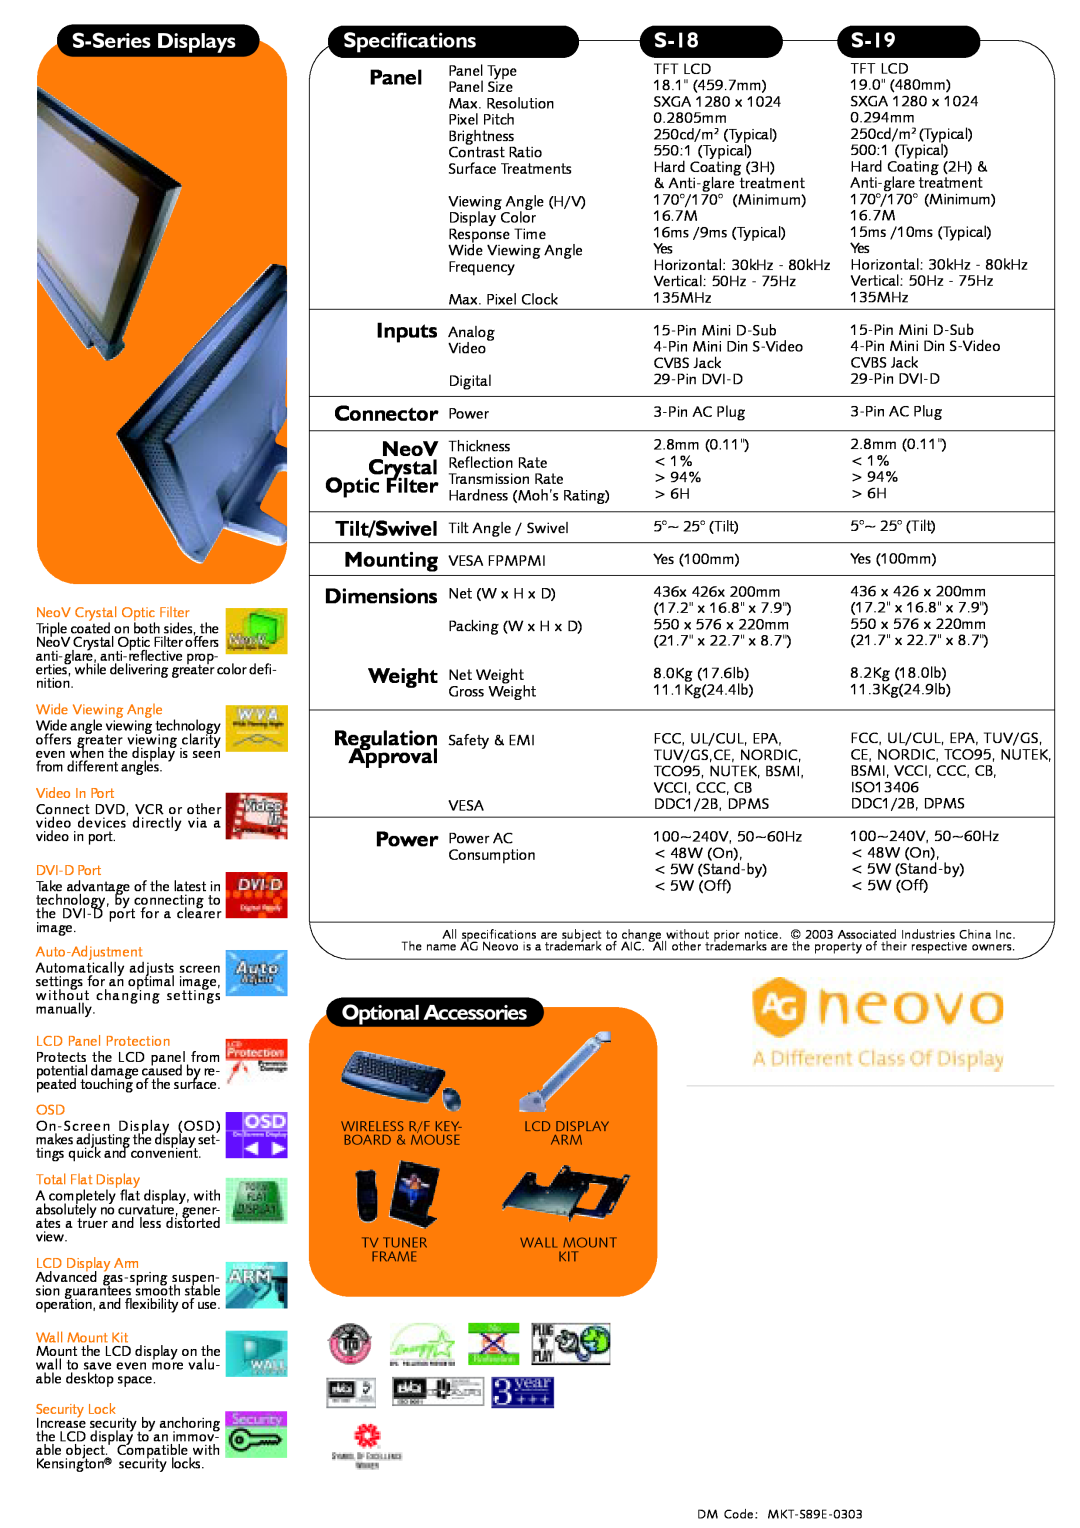 AG Neovo S-18/S-19 warranty Panel, Inputs Analog, Connector Power, Crystal, Optic Filter, Tilt/Swivel, Mounting, Approval 